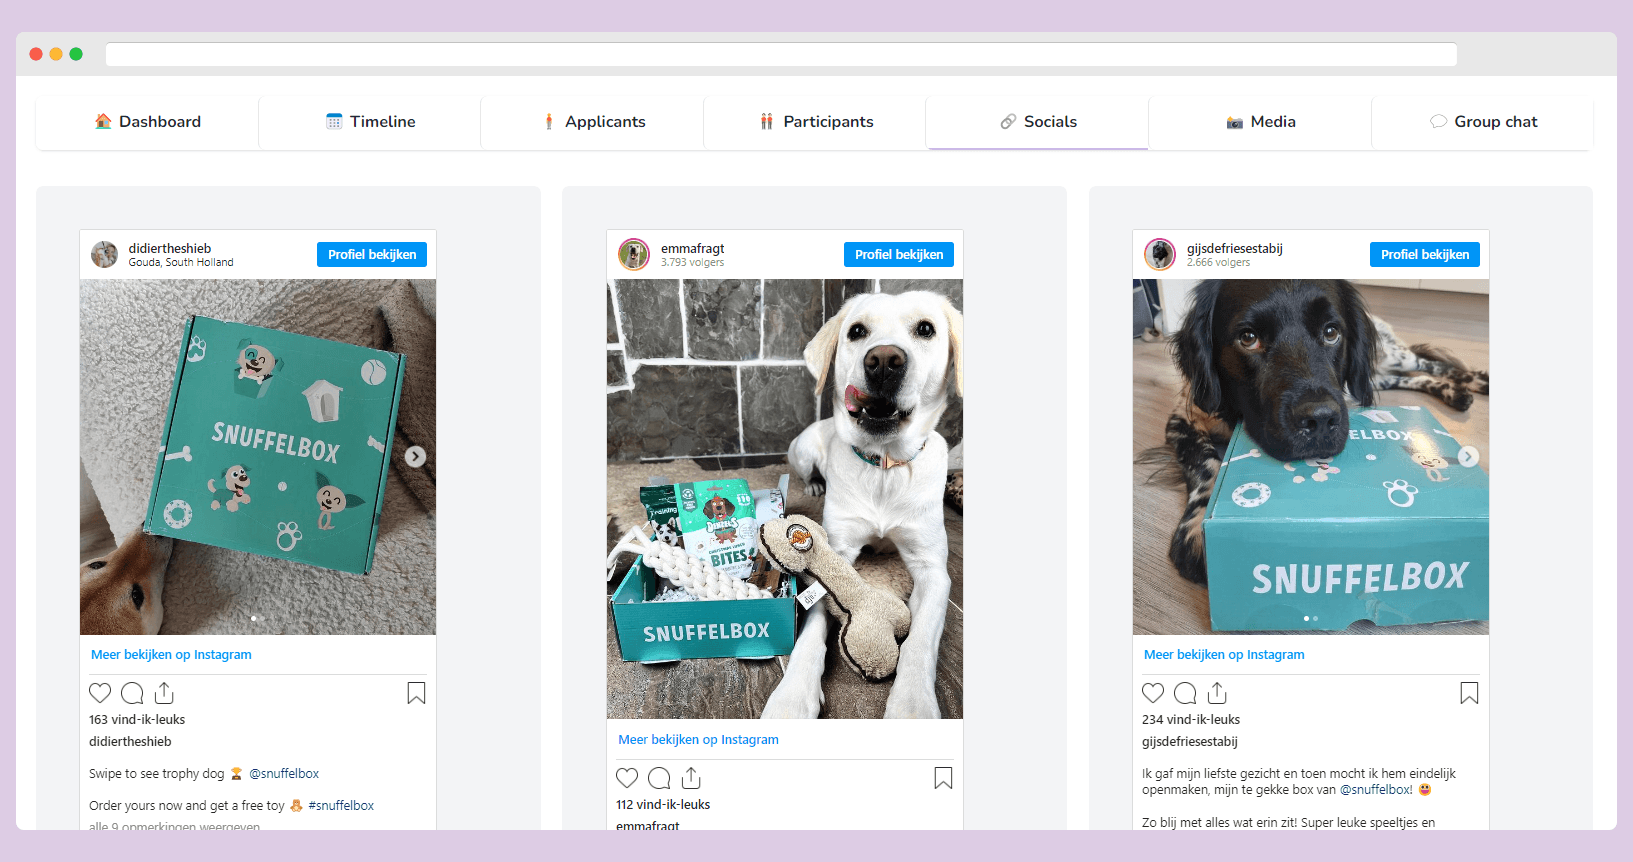 Social postings tied to a dog influencer campaign